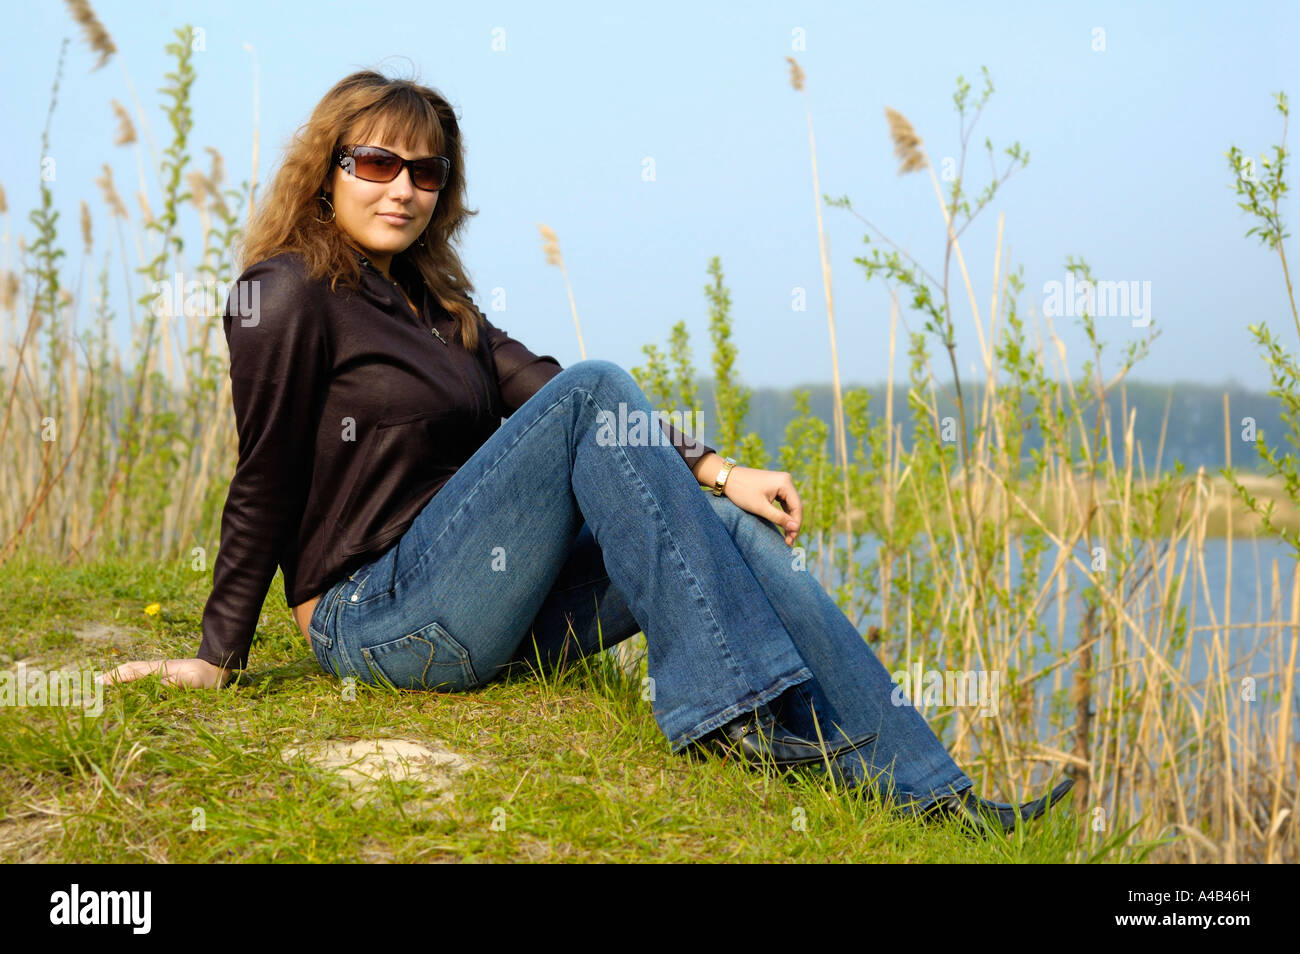 Young woman on a lake shore Stock Photo